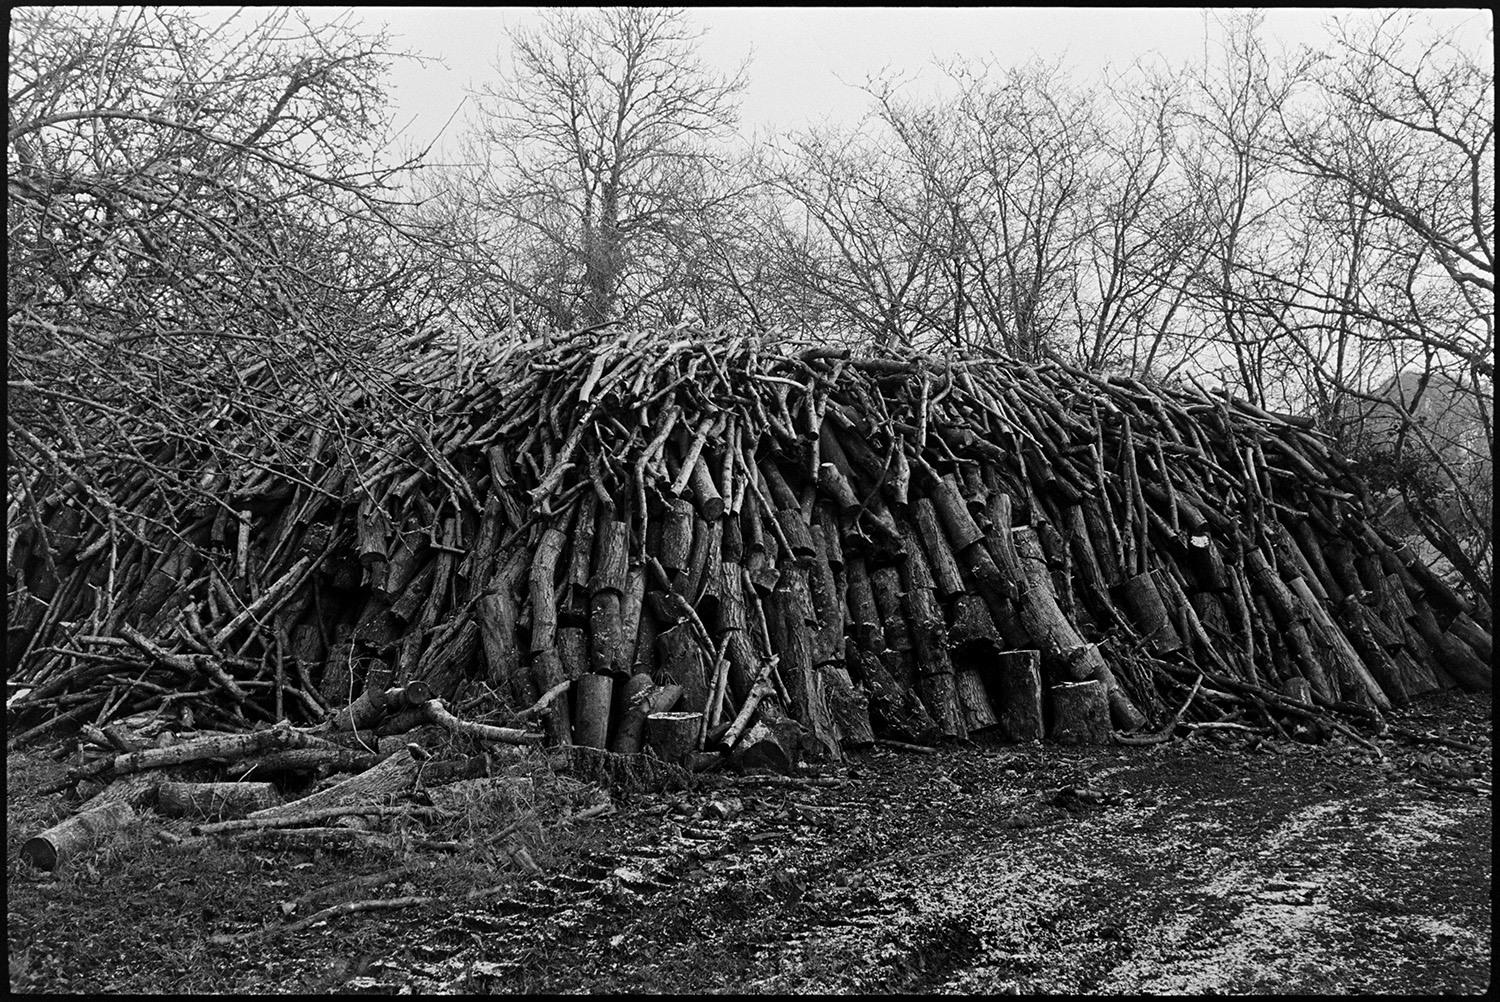 Large woodpile in old orchard. 
[A large woodpile in an old orchard at Middle Week, Iddesleigh. Tyre tracks lead up to the log pile.]